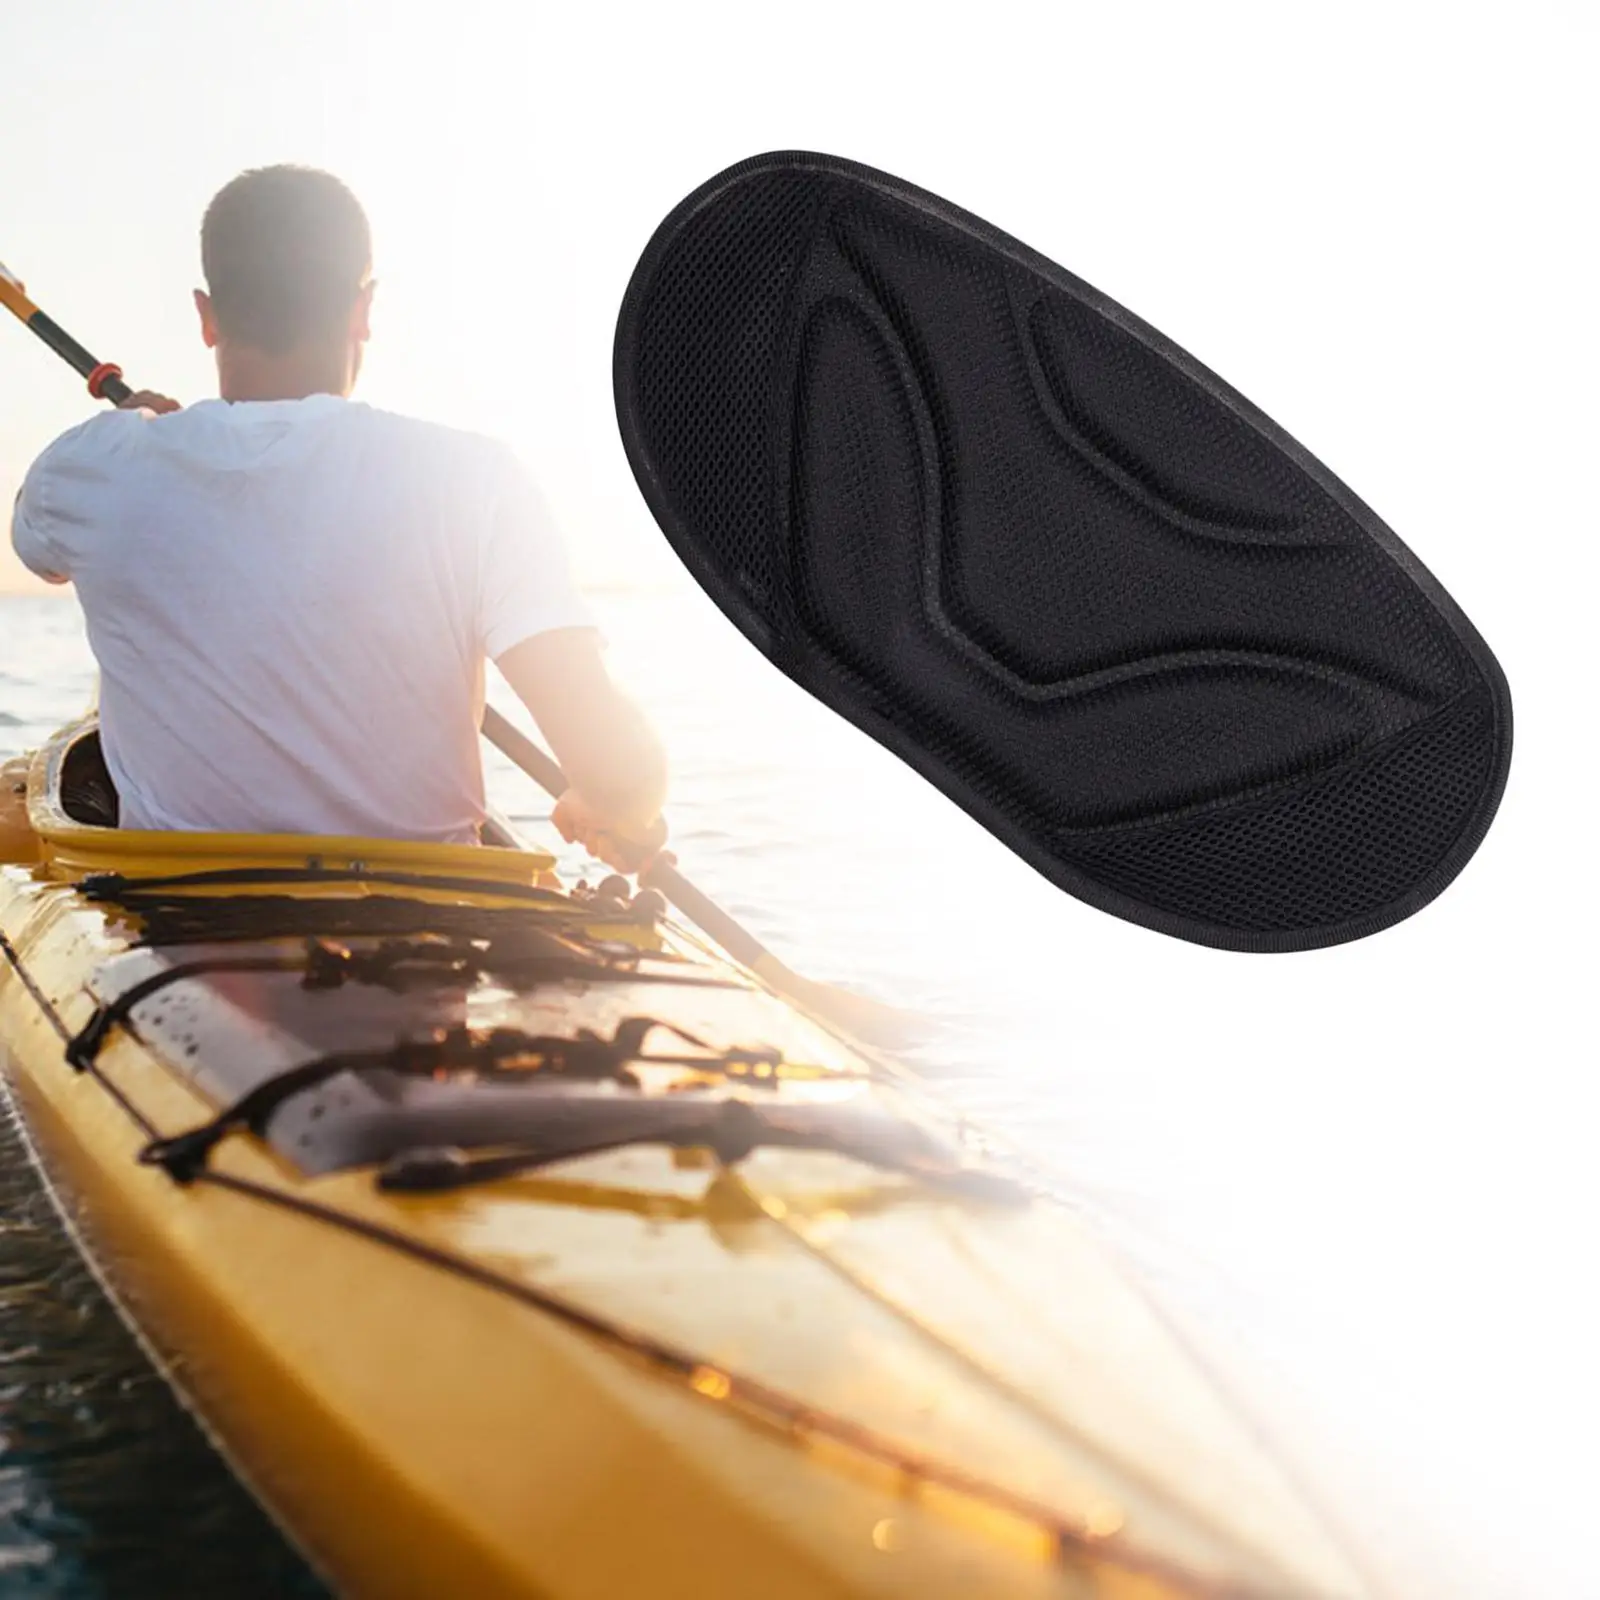 Kayak Padded Seat Lightweight Backrest Nonslip Detachable Soft Pad Back Support Boat Cushion for Canoeing Rafting Accessory